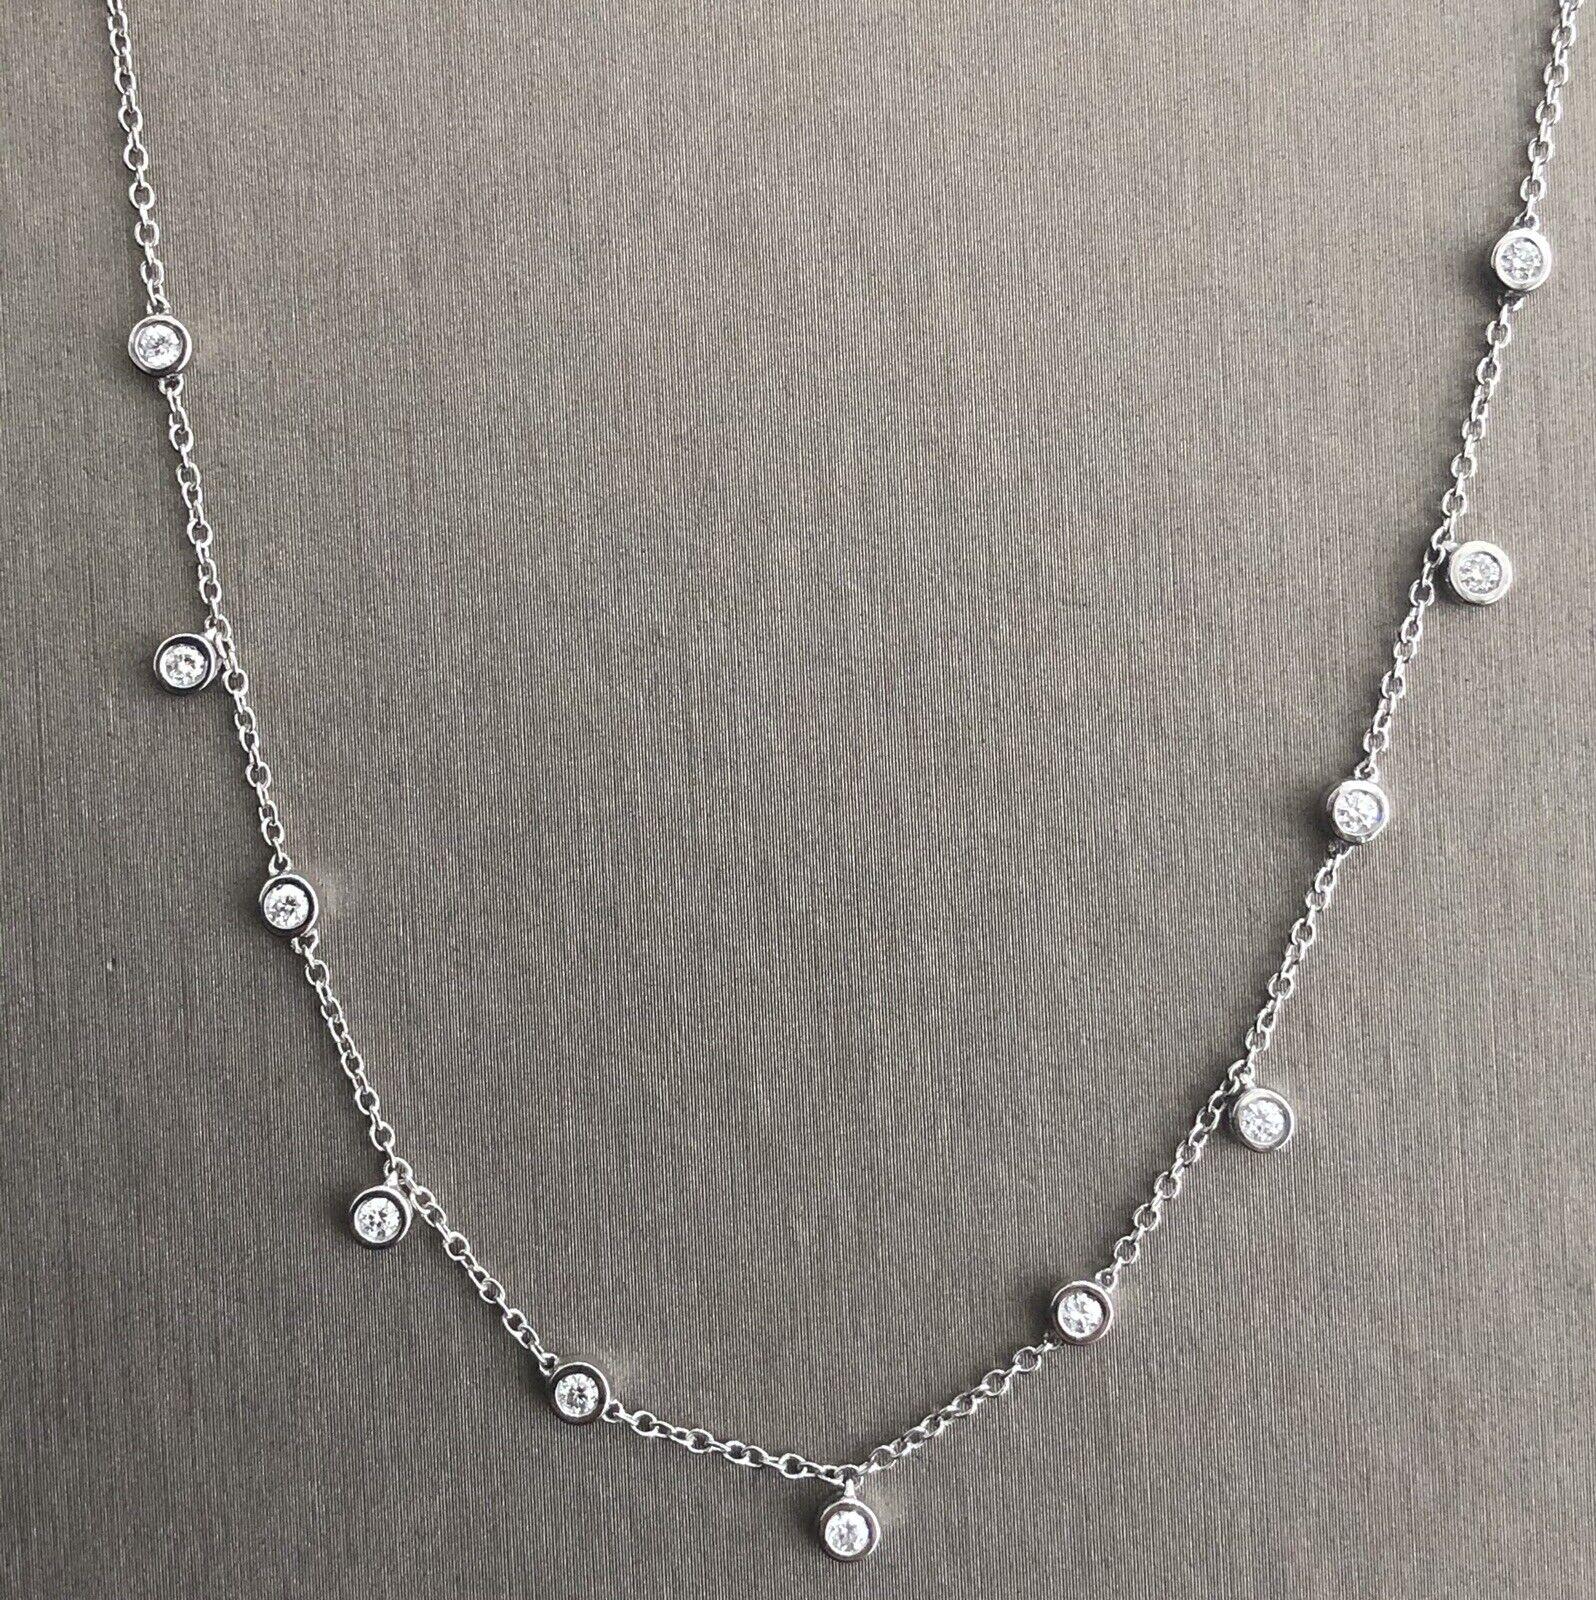 High jewellery designer piece right from heart of London Hatton Garden

18 inch long chain fully embellished with SI+/VS clarity sparkling solitaire station diamonds totalling 0.33ct

Fully Hallmarked with 750

Breathtaking

Please study pics for